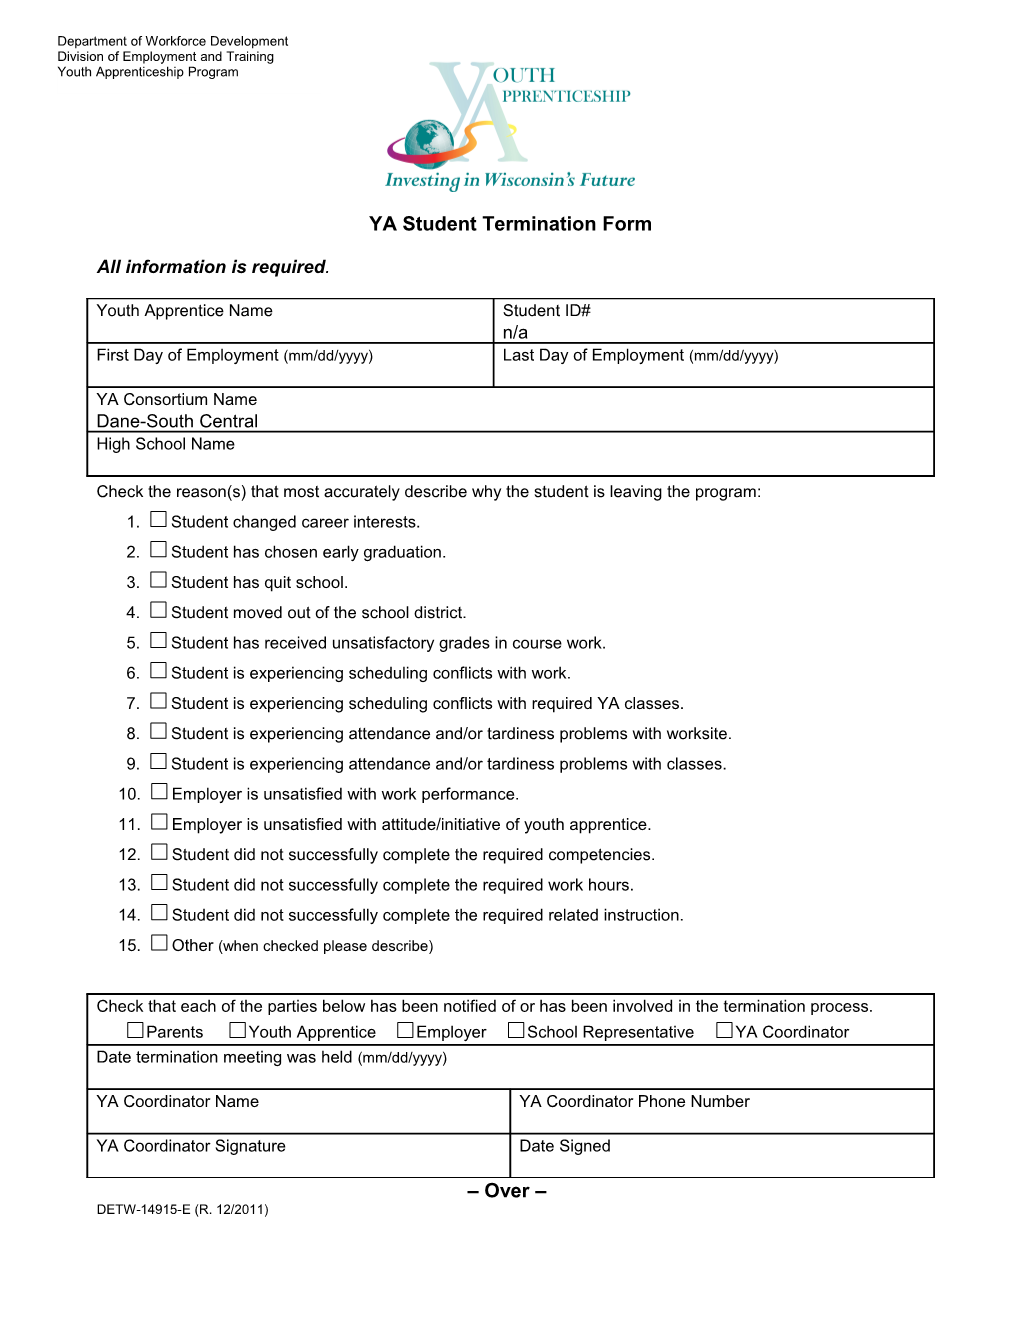 DETW-14915-E, Youth Apprenticeship Student Termination Form